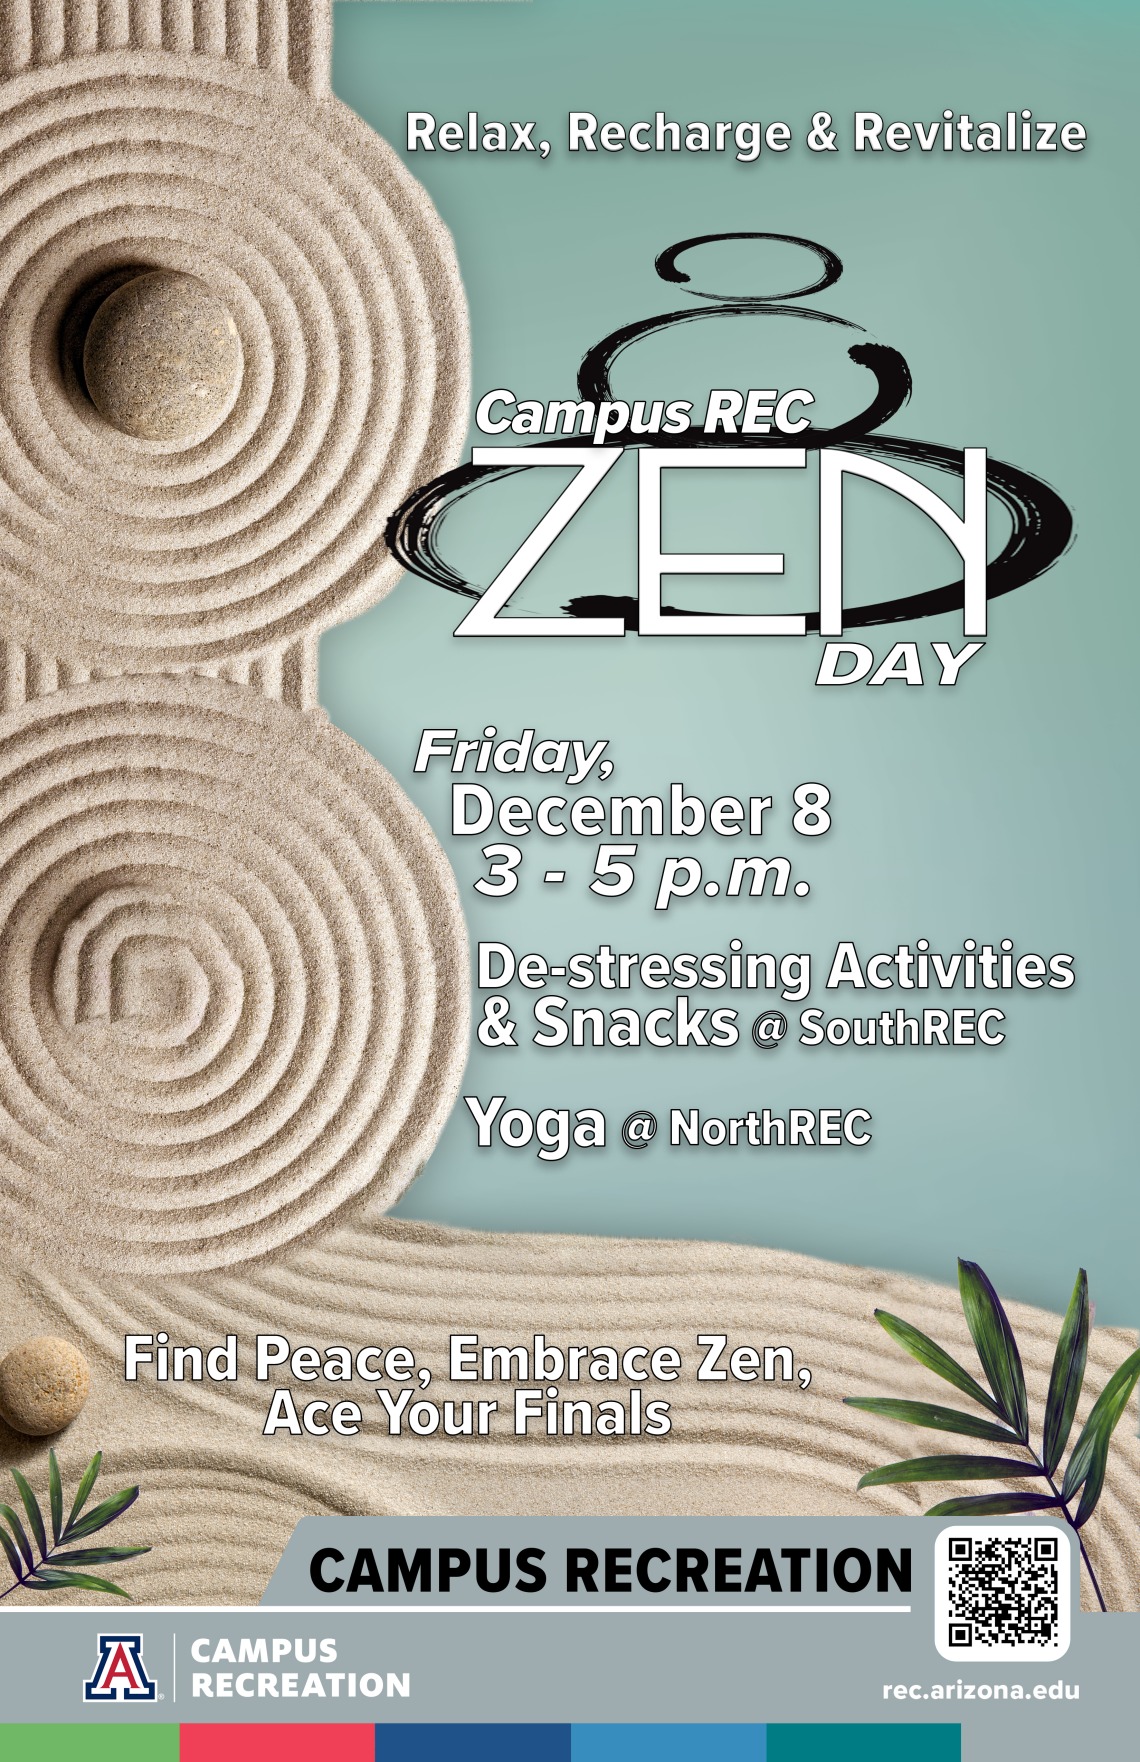 Flyer advertising Zen Day at Campus Recreation, SouthREC from 3 - 5pm Friday, December 8th, 2023. There will also be a free yoga session at NorthREC from 4-5pm on the same date. The bottom line reads, "Find Peace, Embrace Zen, Ace Your Finals".